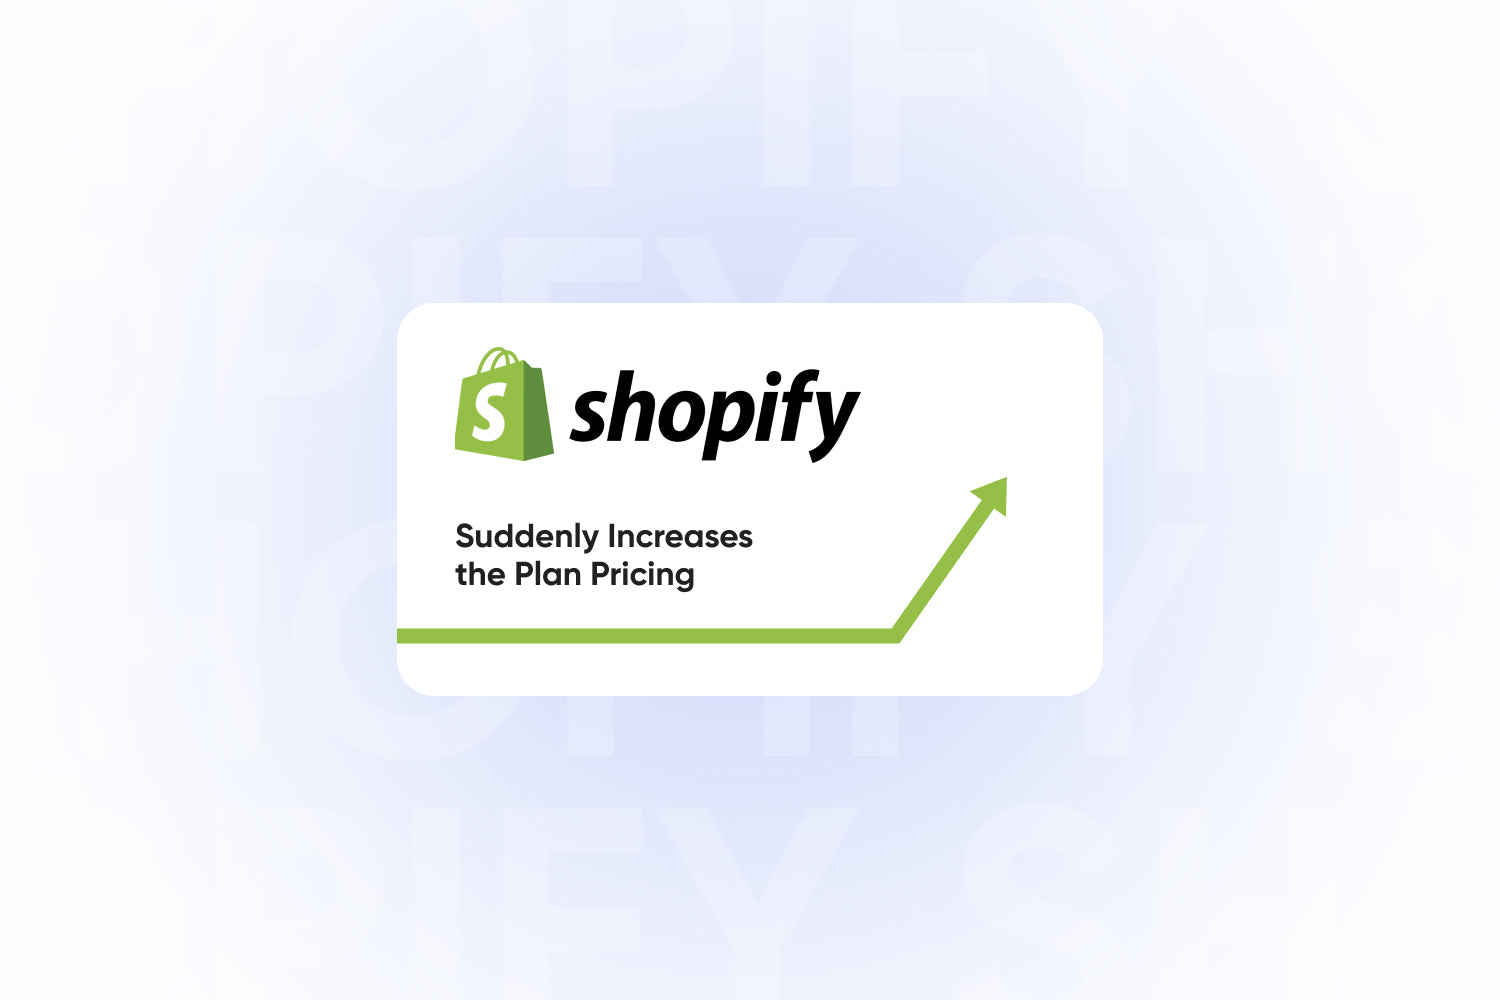 Shopify suddenly increases the plan pricing